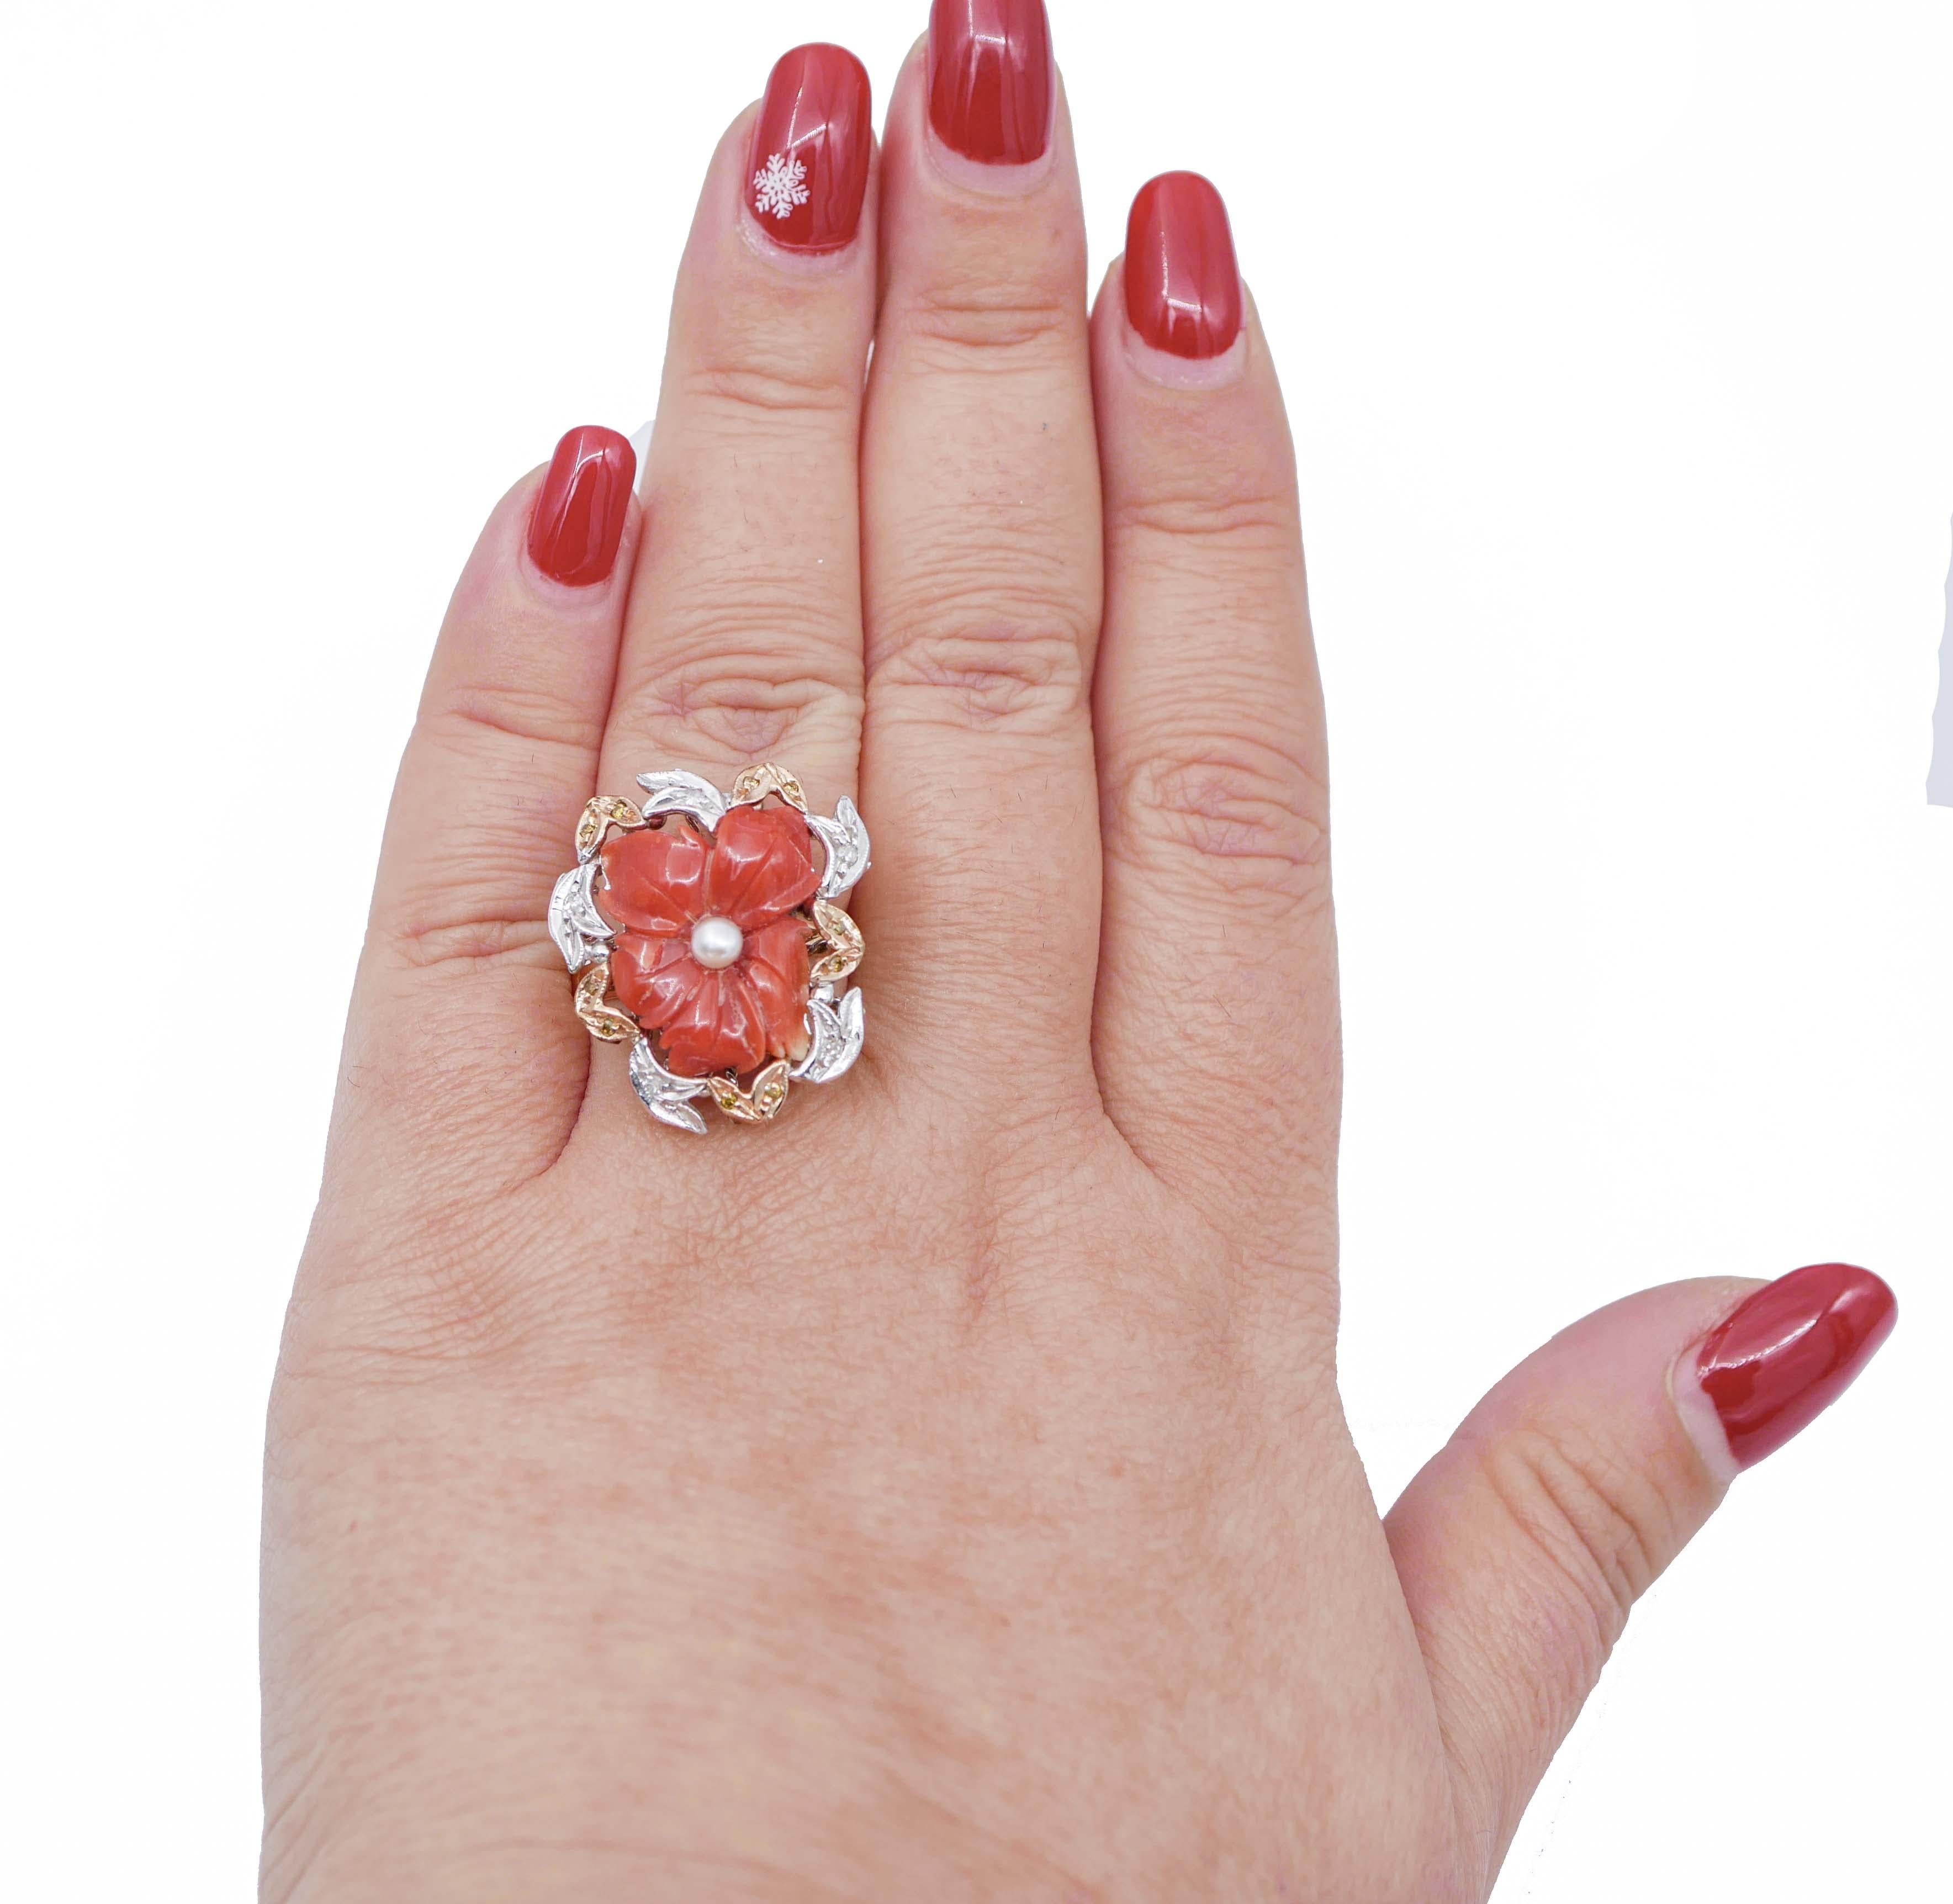 Mixed Cut Coral, Fancy and White Diamonds, Pearls, 14 Karat White and Rose Gold Ring For Sale